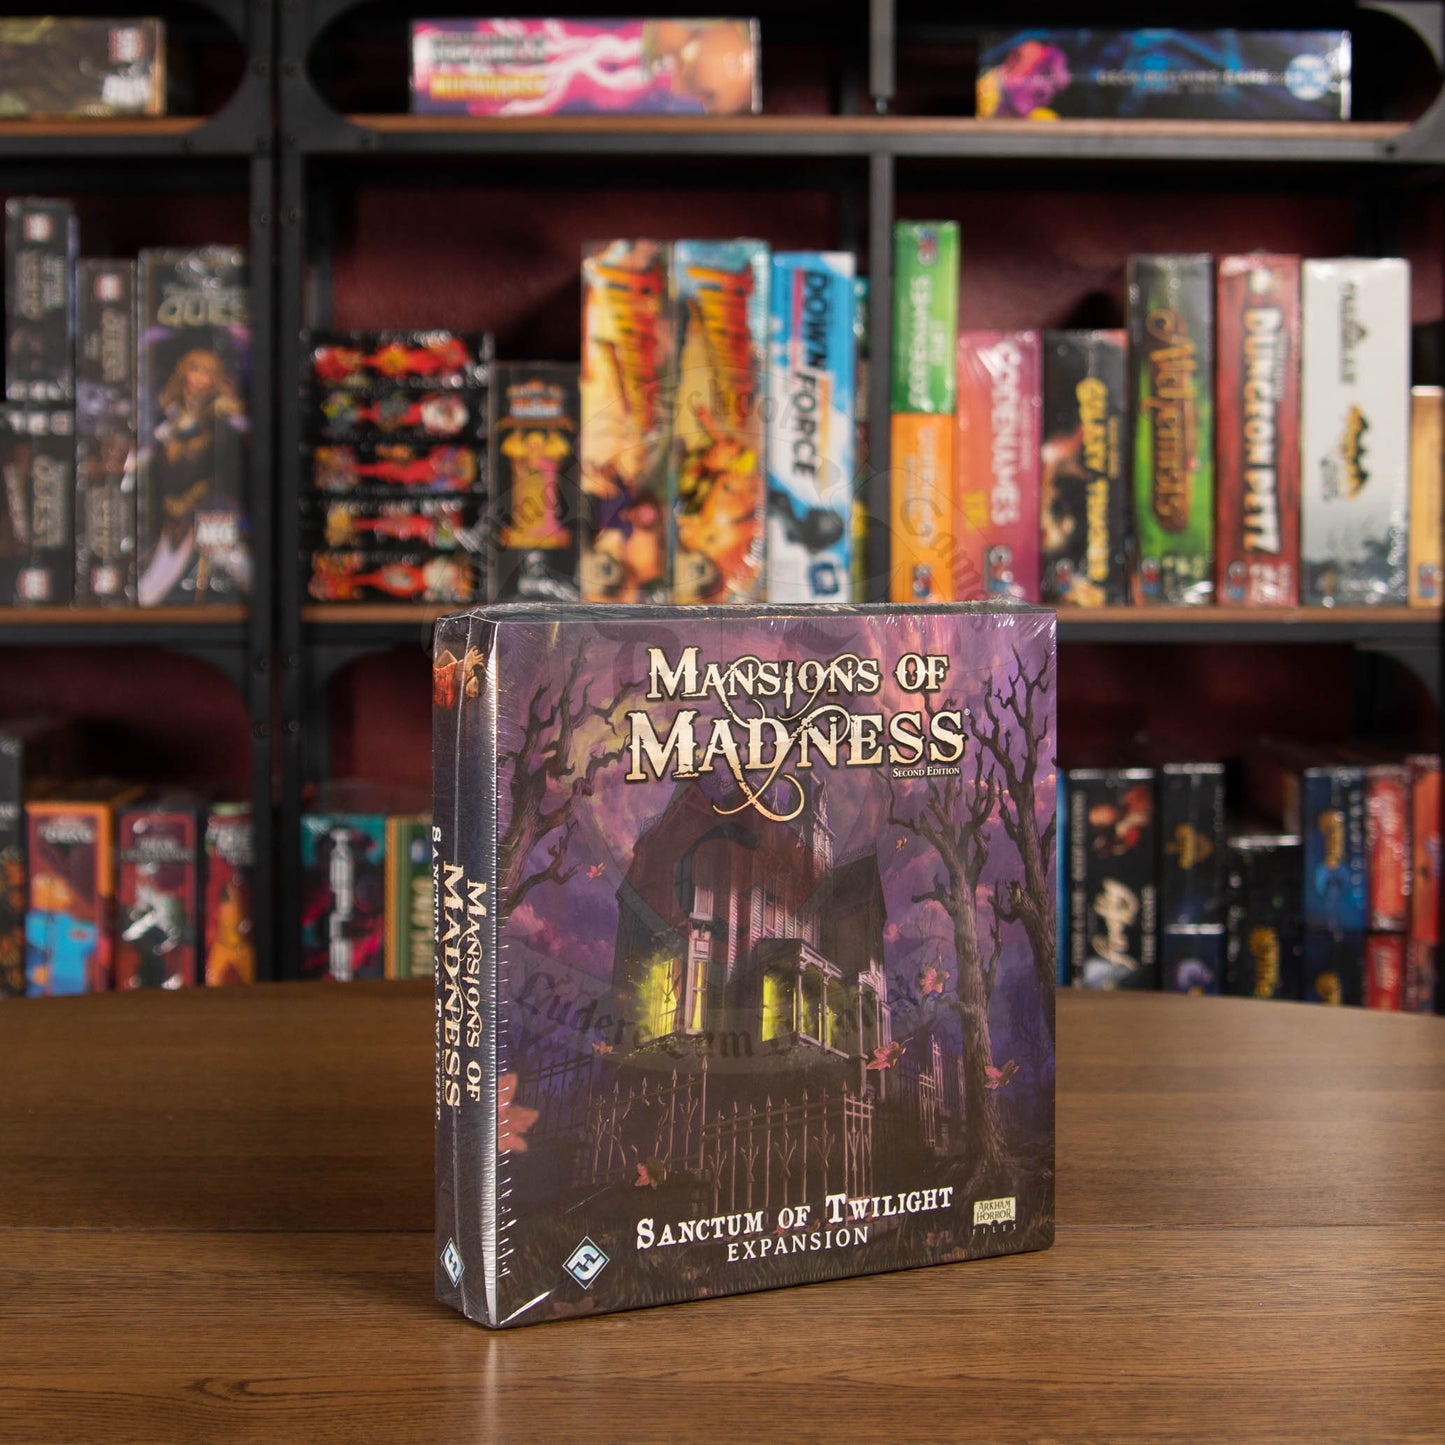 (BSG Certified USED) Mansions of Madness - Sanctum of Twilight